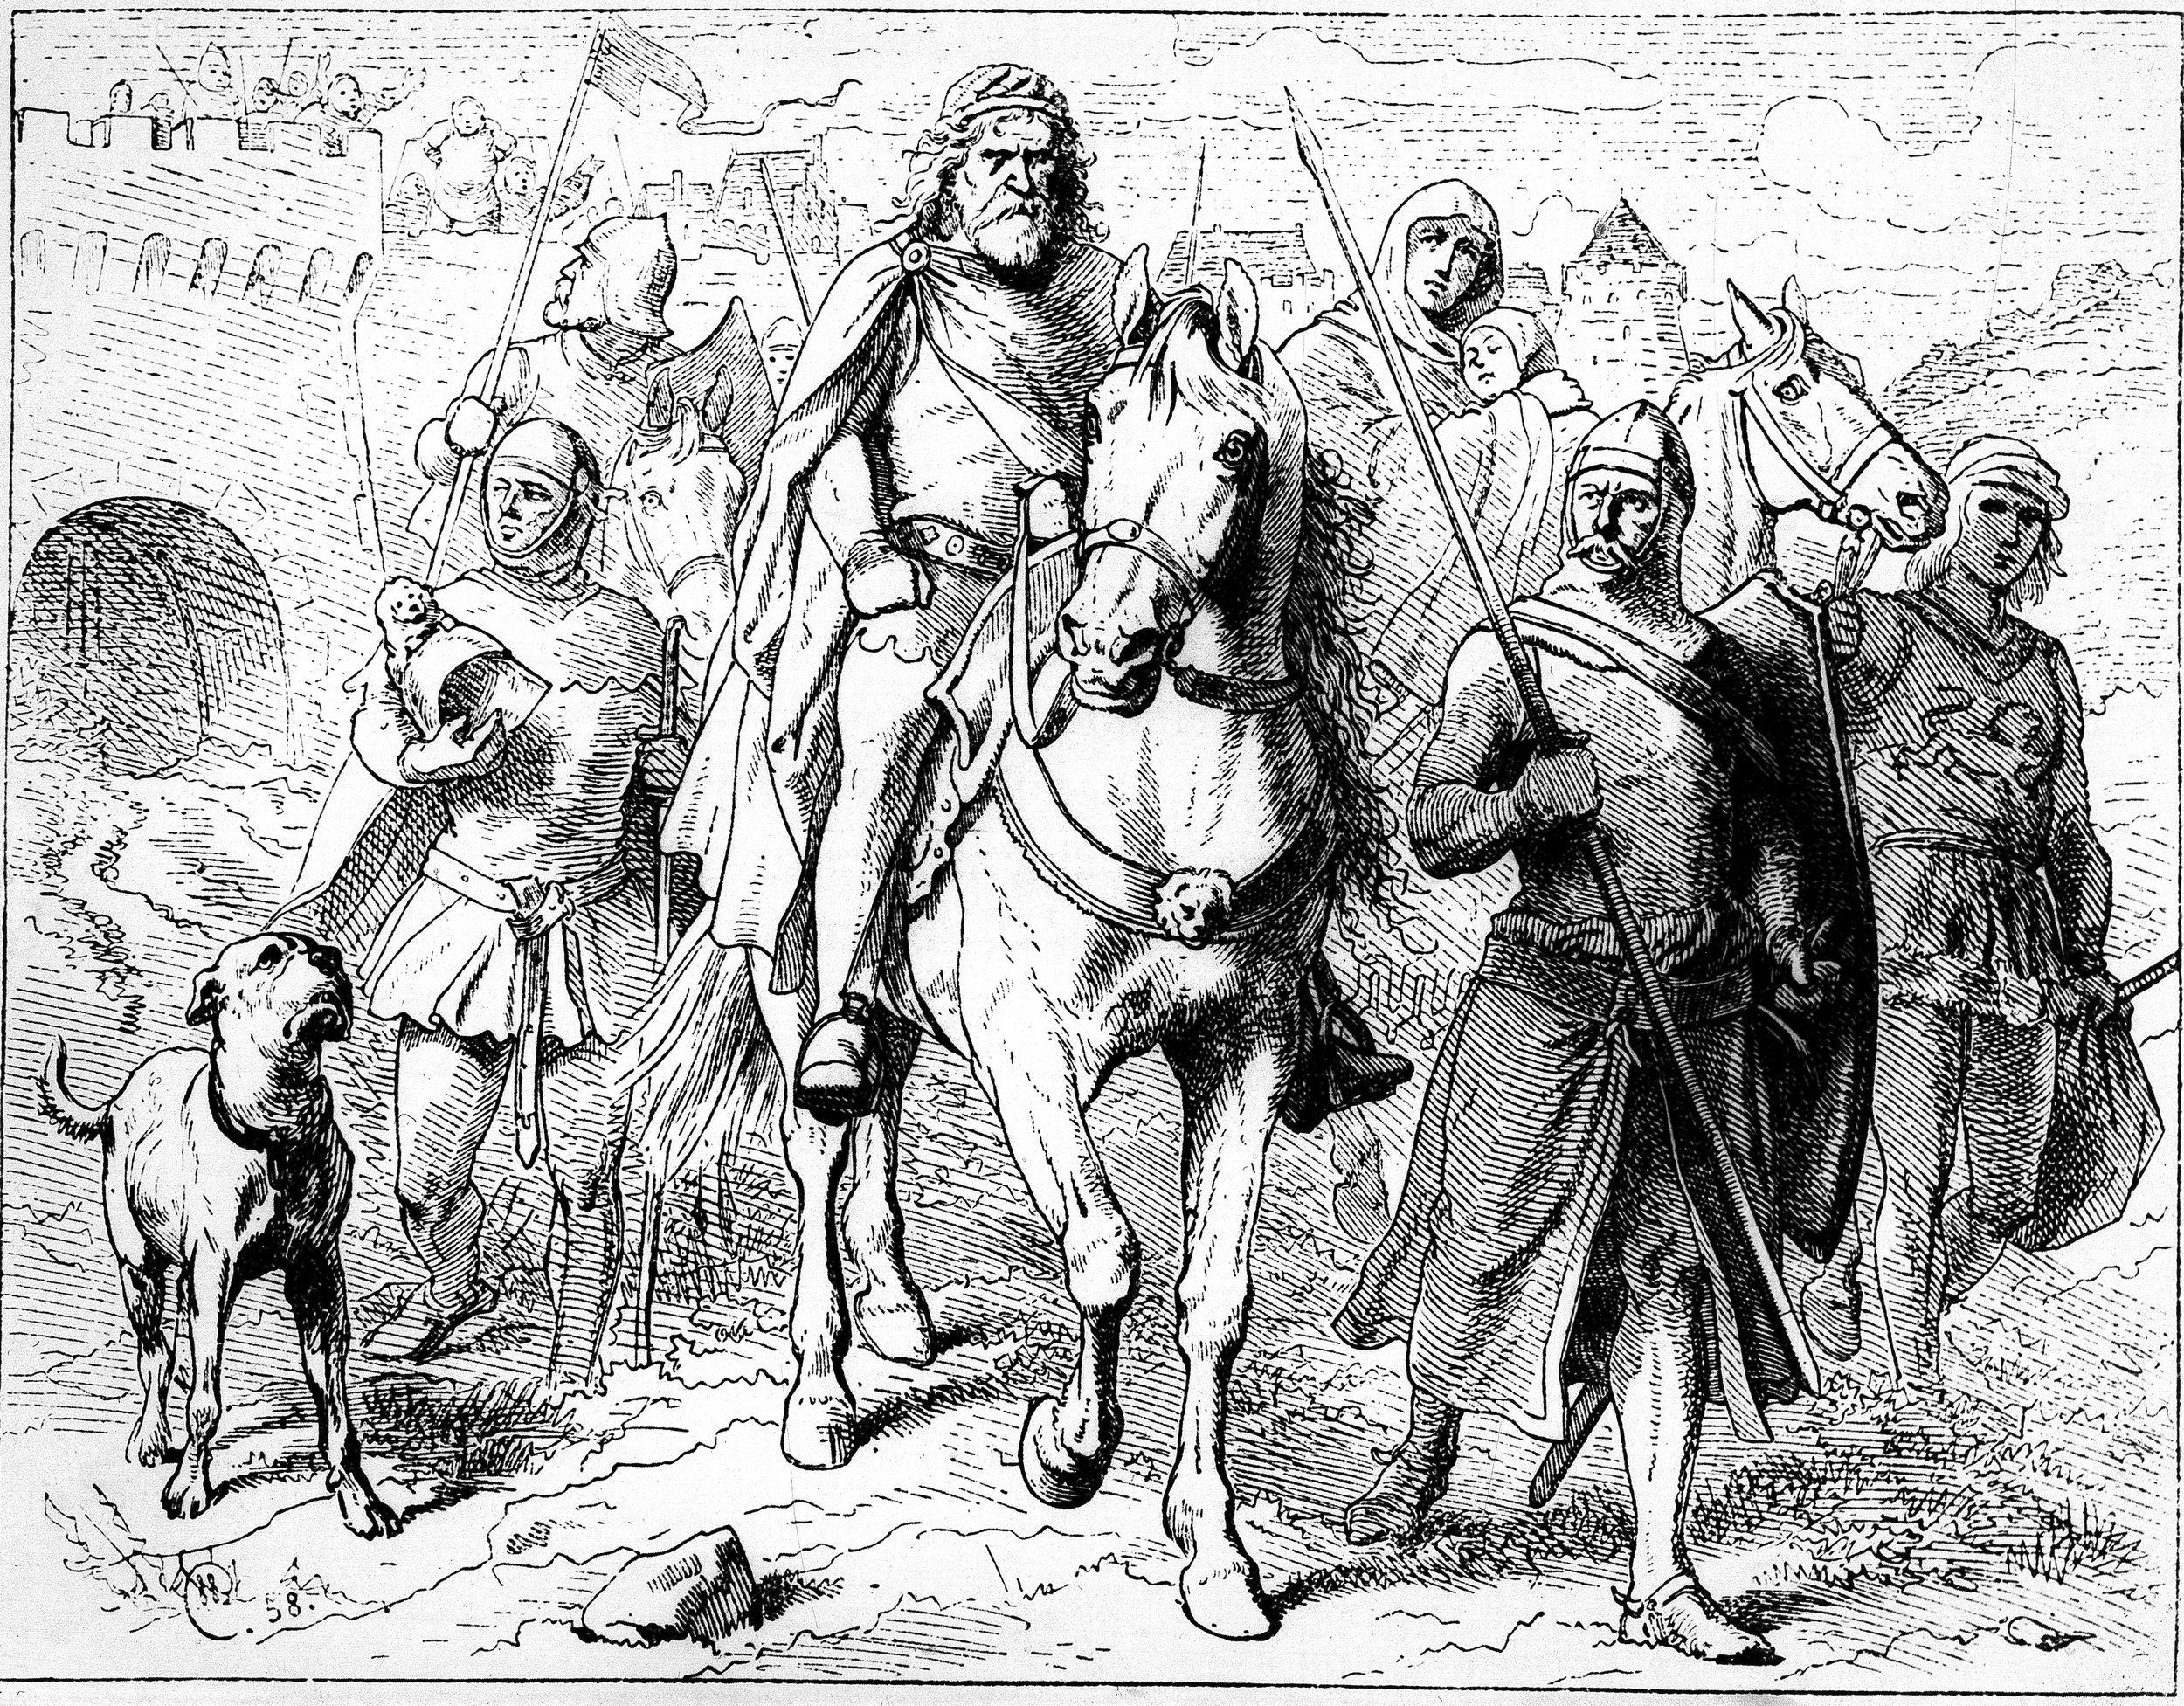 German knight Heinrich der Lowe, or Henry the Lion, was a cousin and supporter of Frederick Barbarossa, the Holy Roman emperor in the late 12th century.